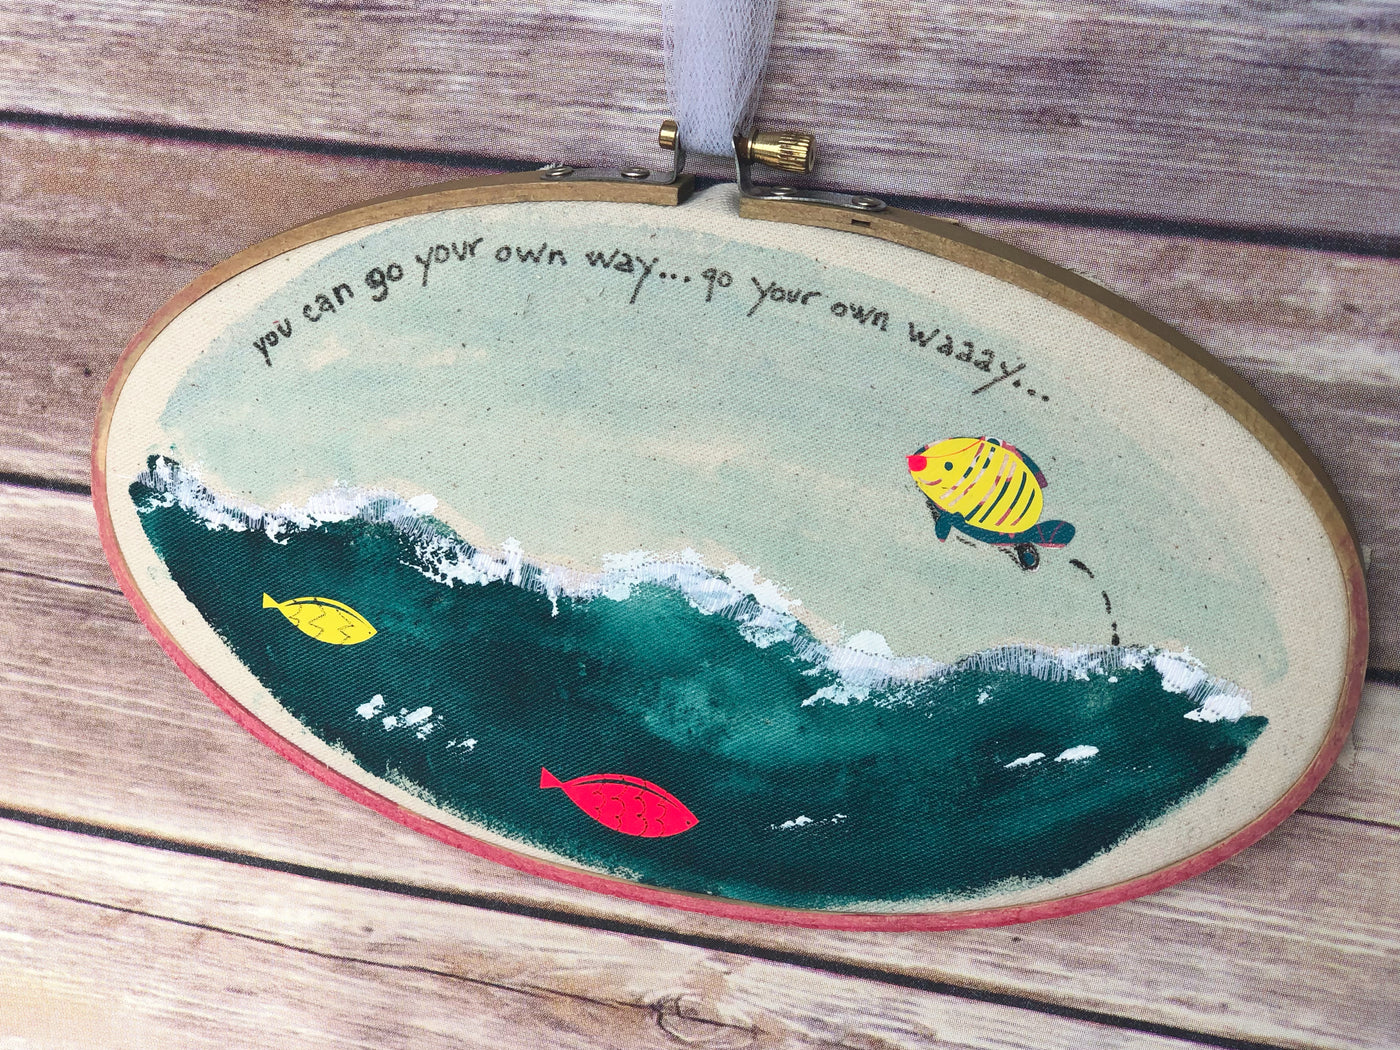 oval wooden dyed hoop art with fabric painted to look like the seashore, with jumping fish and the words, "you can go your own way.."